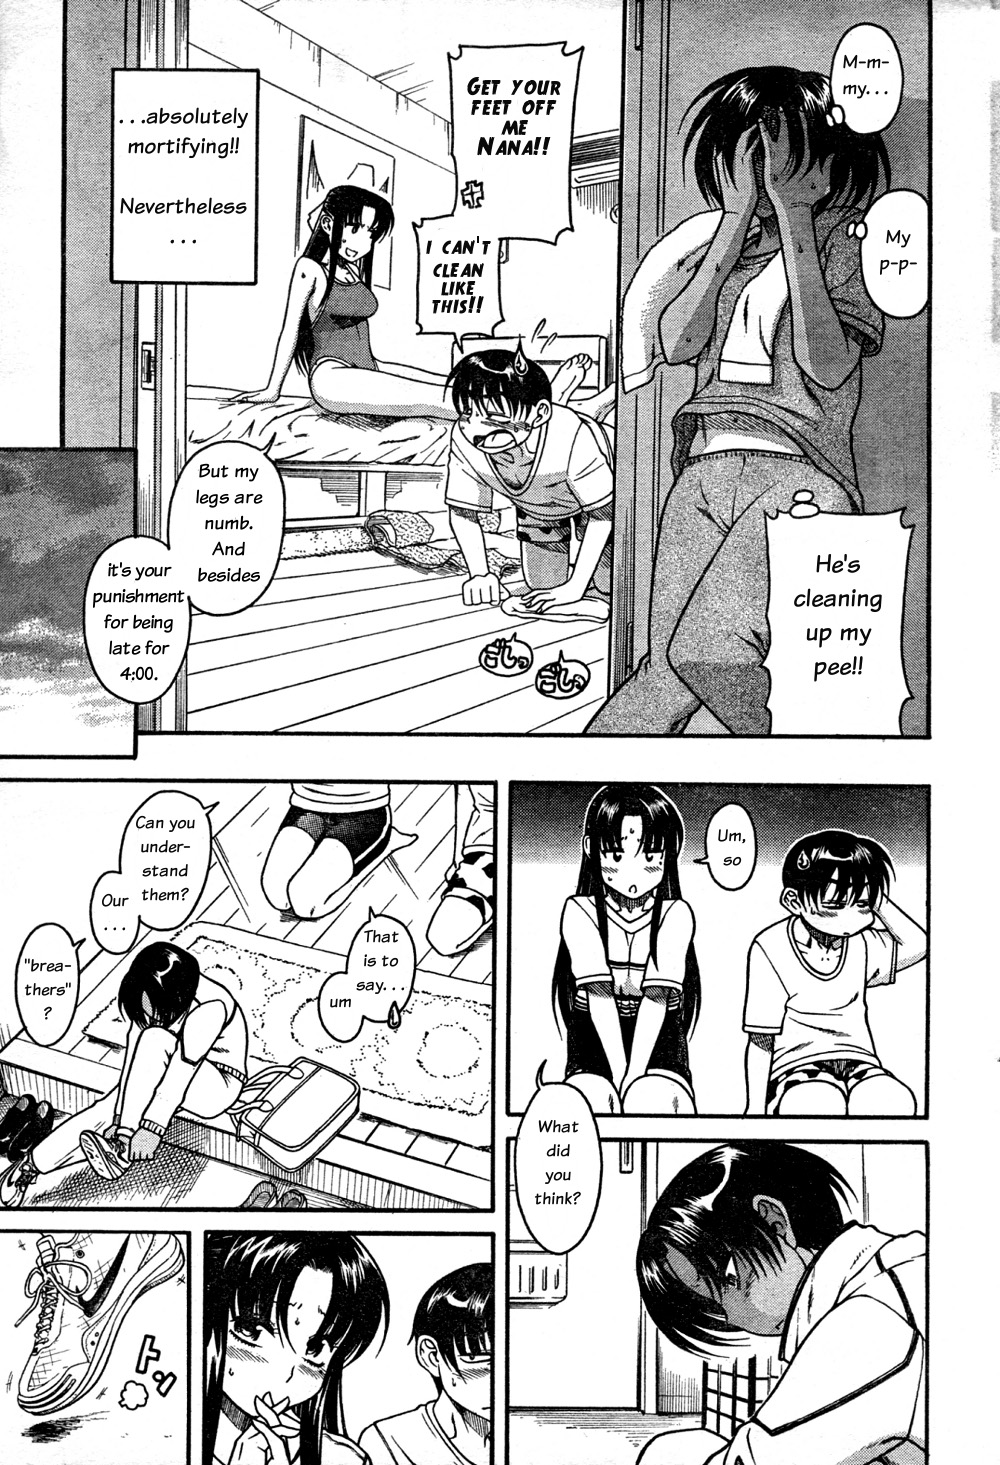 bondage feet manga - absolutely mortifying! Get Your Feet Off Nanai! Neverthelesa 1 Can'T He's cleaning peel! Ama